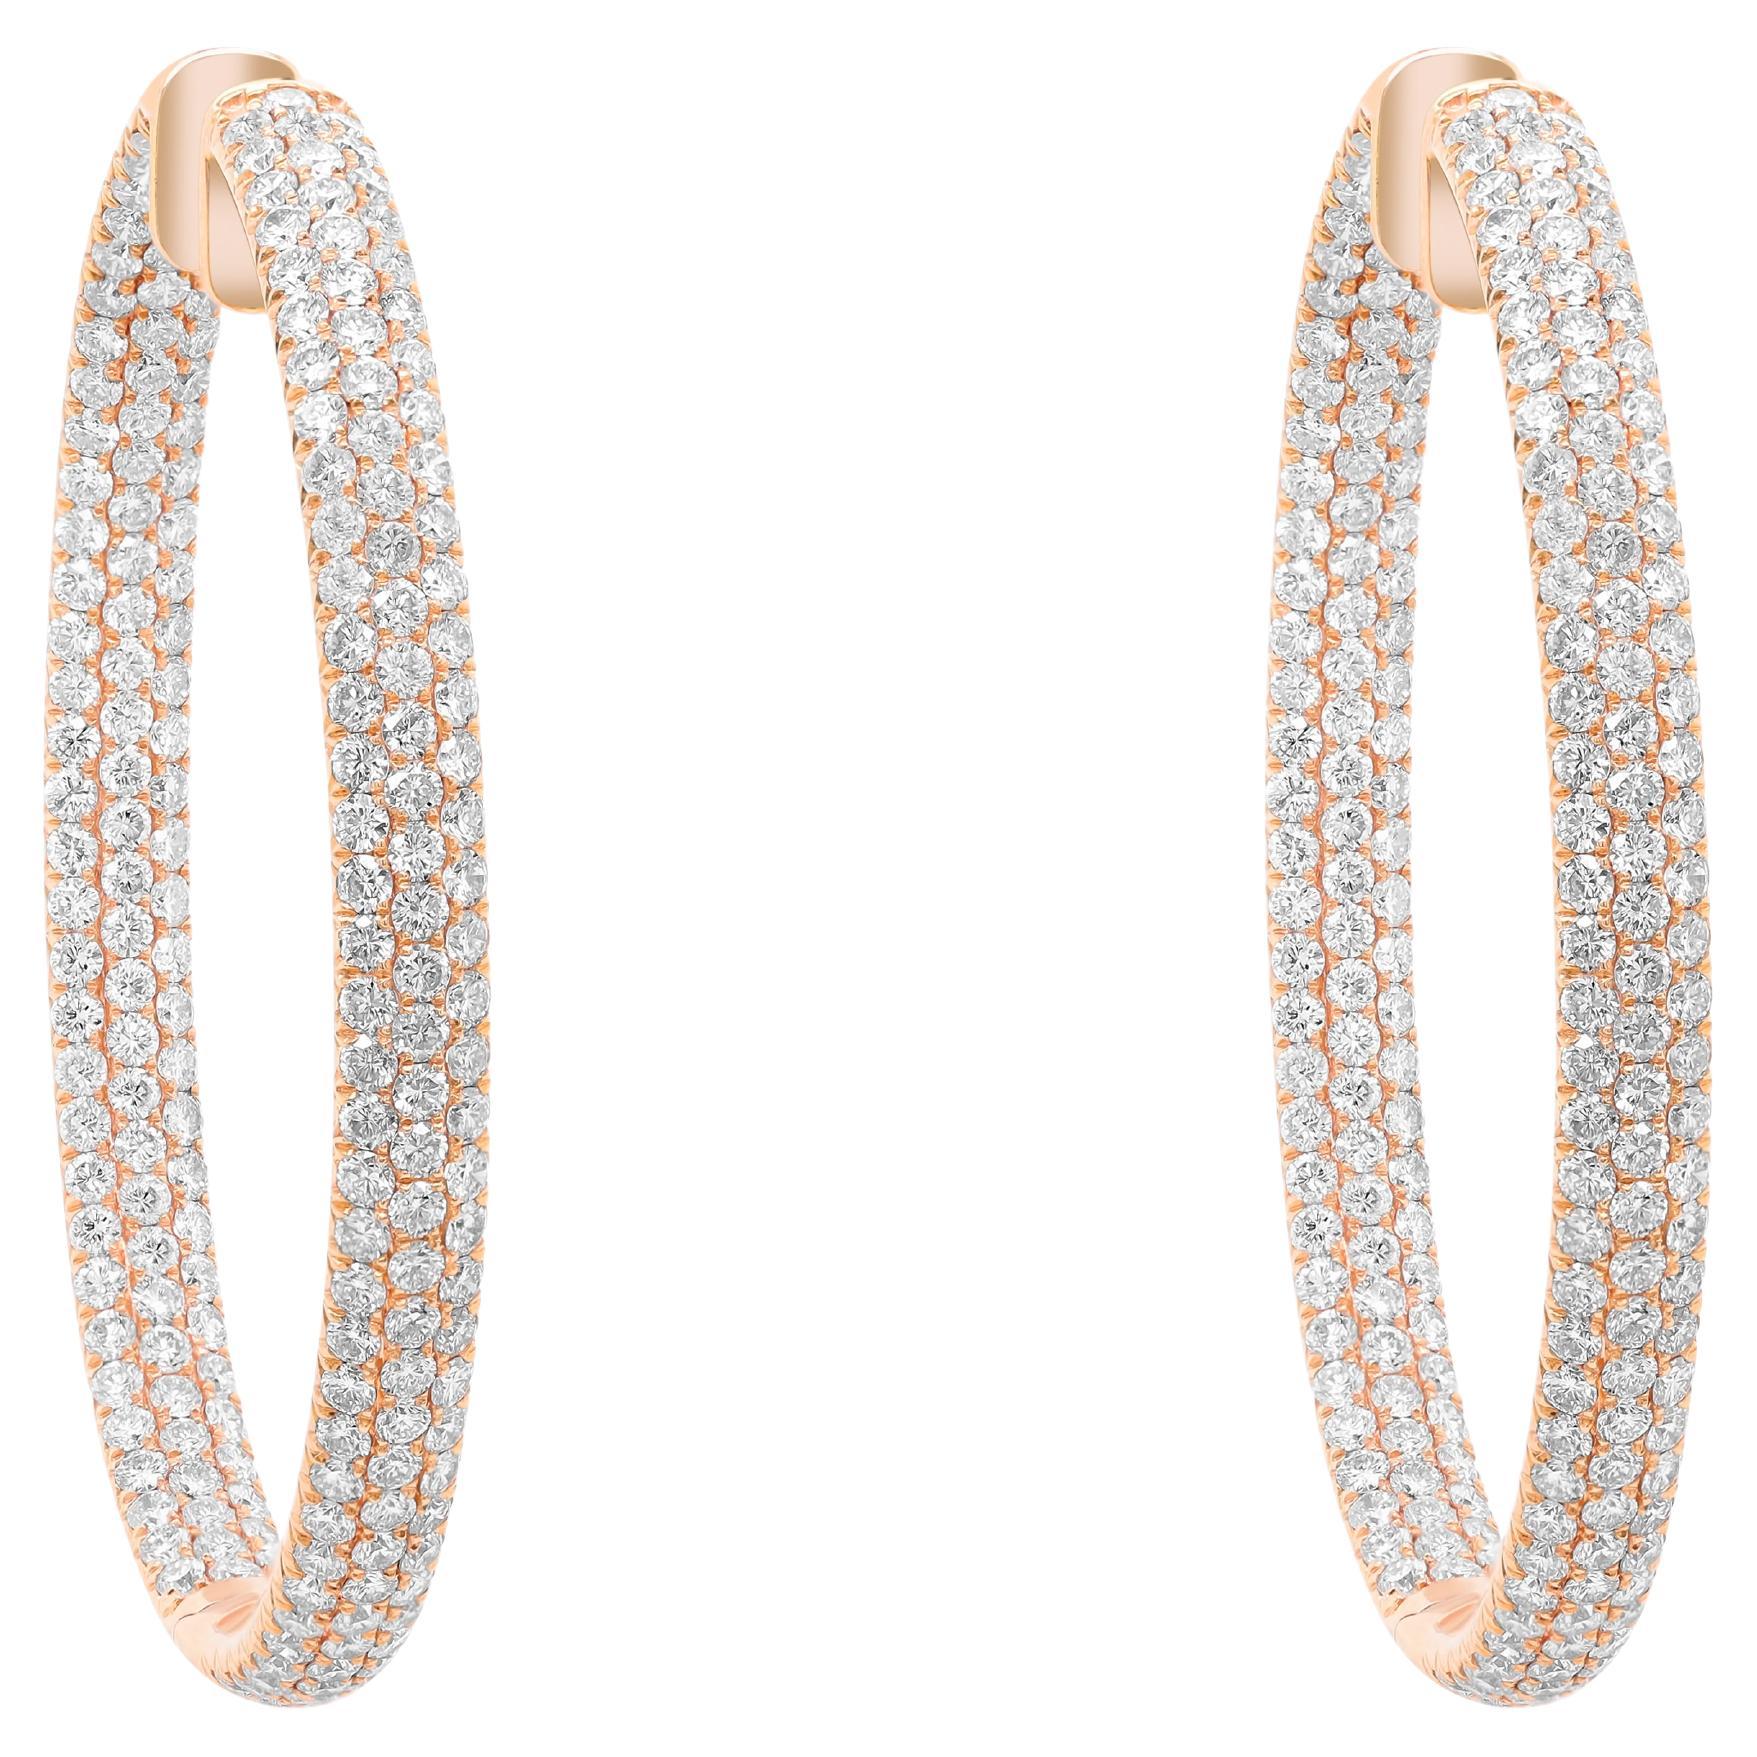 Diana M.18 kt yellow gold inside-out hoop earrings adorned with 3 rows of 11.30  For Sale